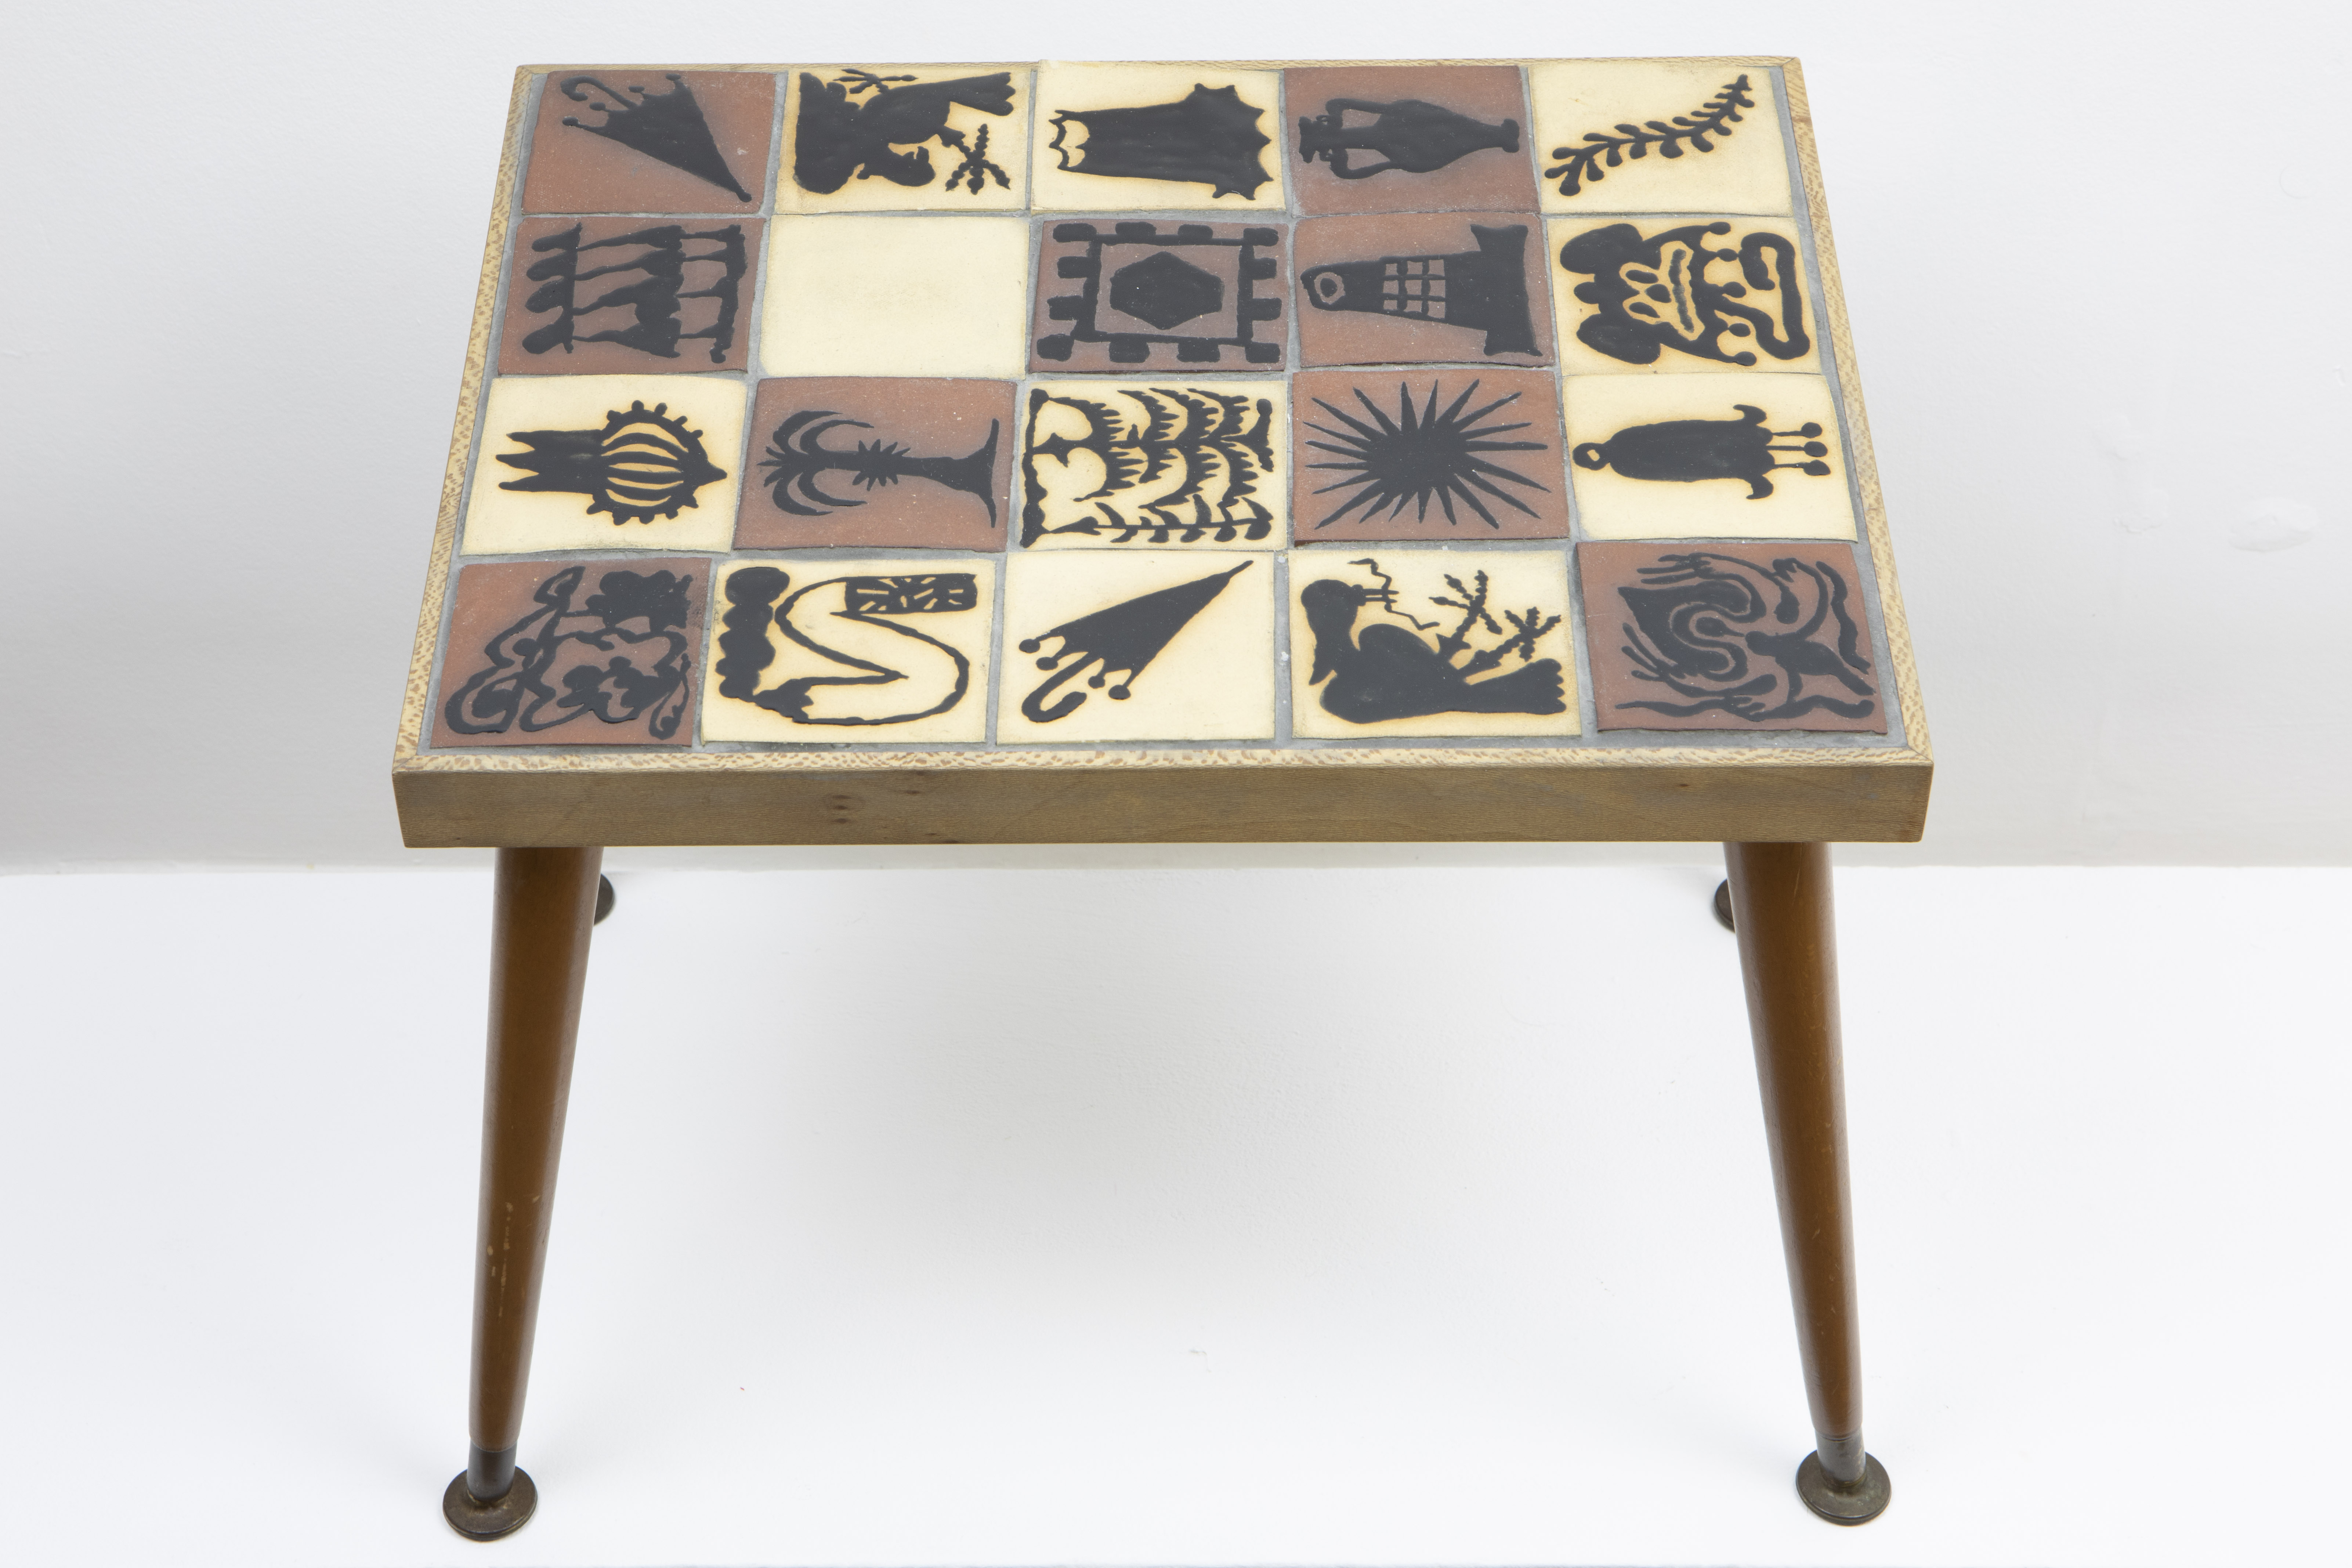 Tom Dowse, Untitled, side table, glazed tiles and found legs, 2019